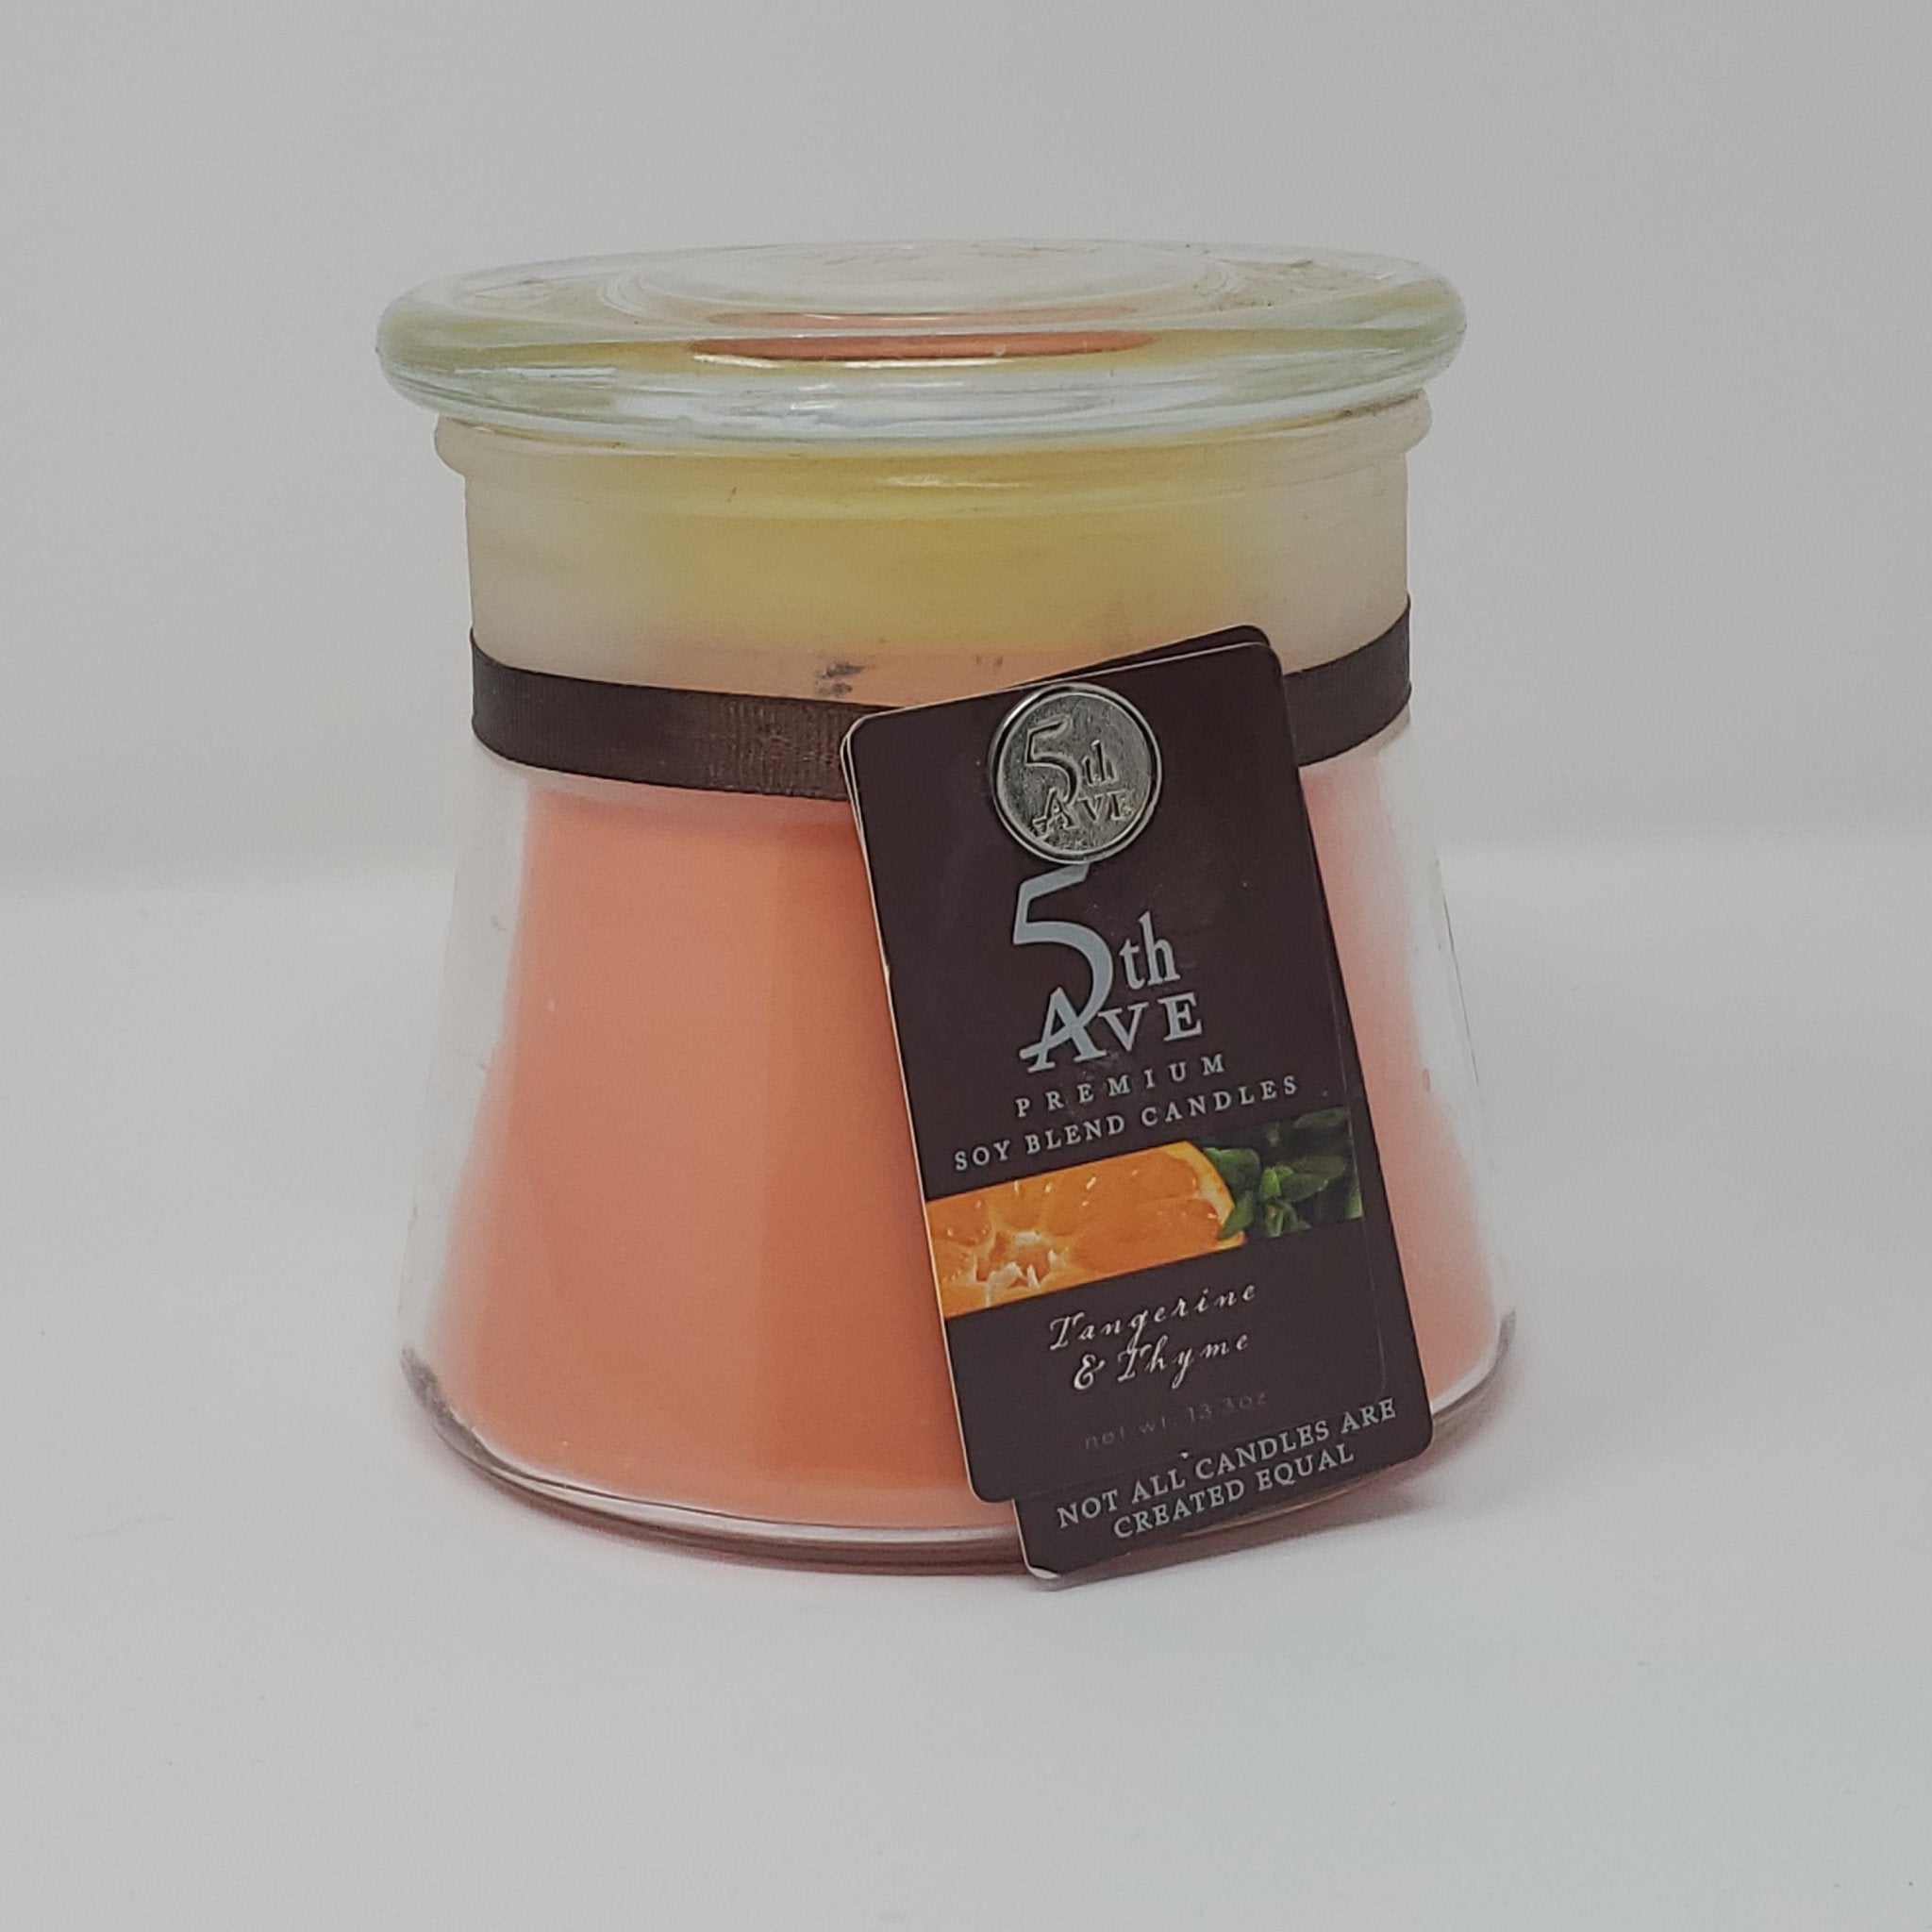 5th Ave Premium - Soy Bean Candle - Bargainwizz